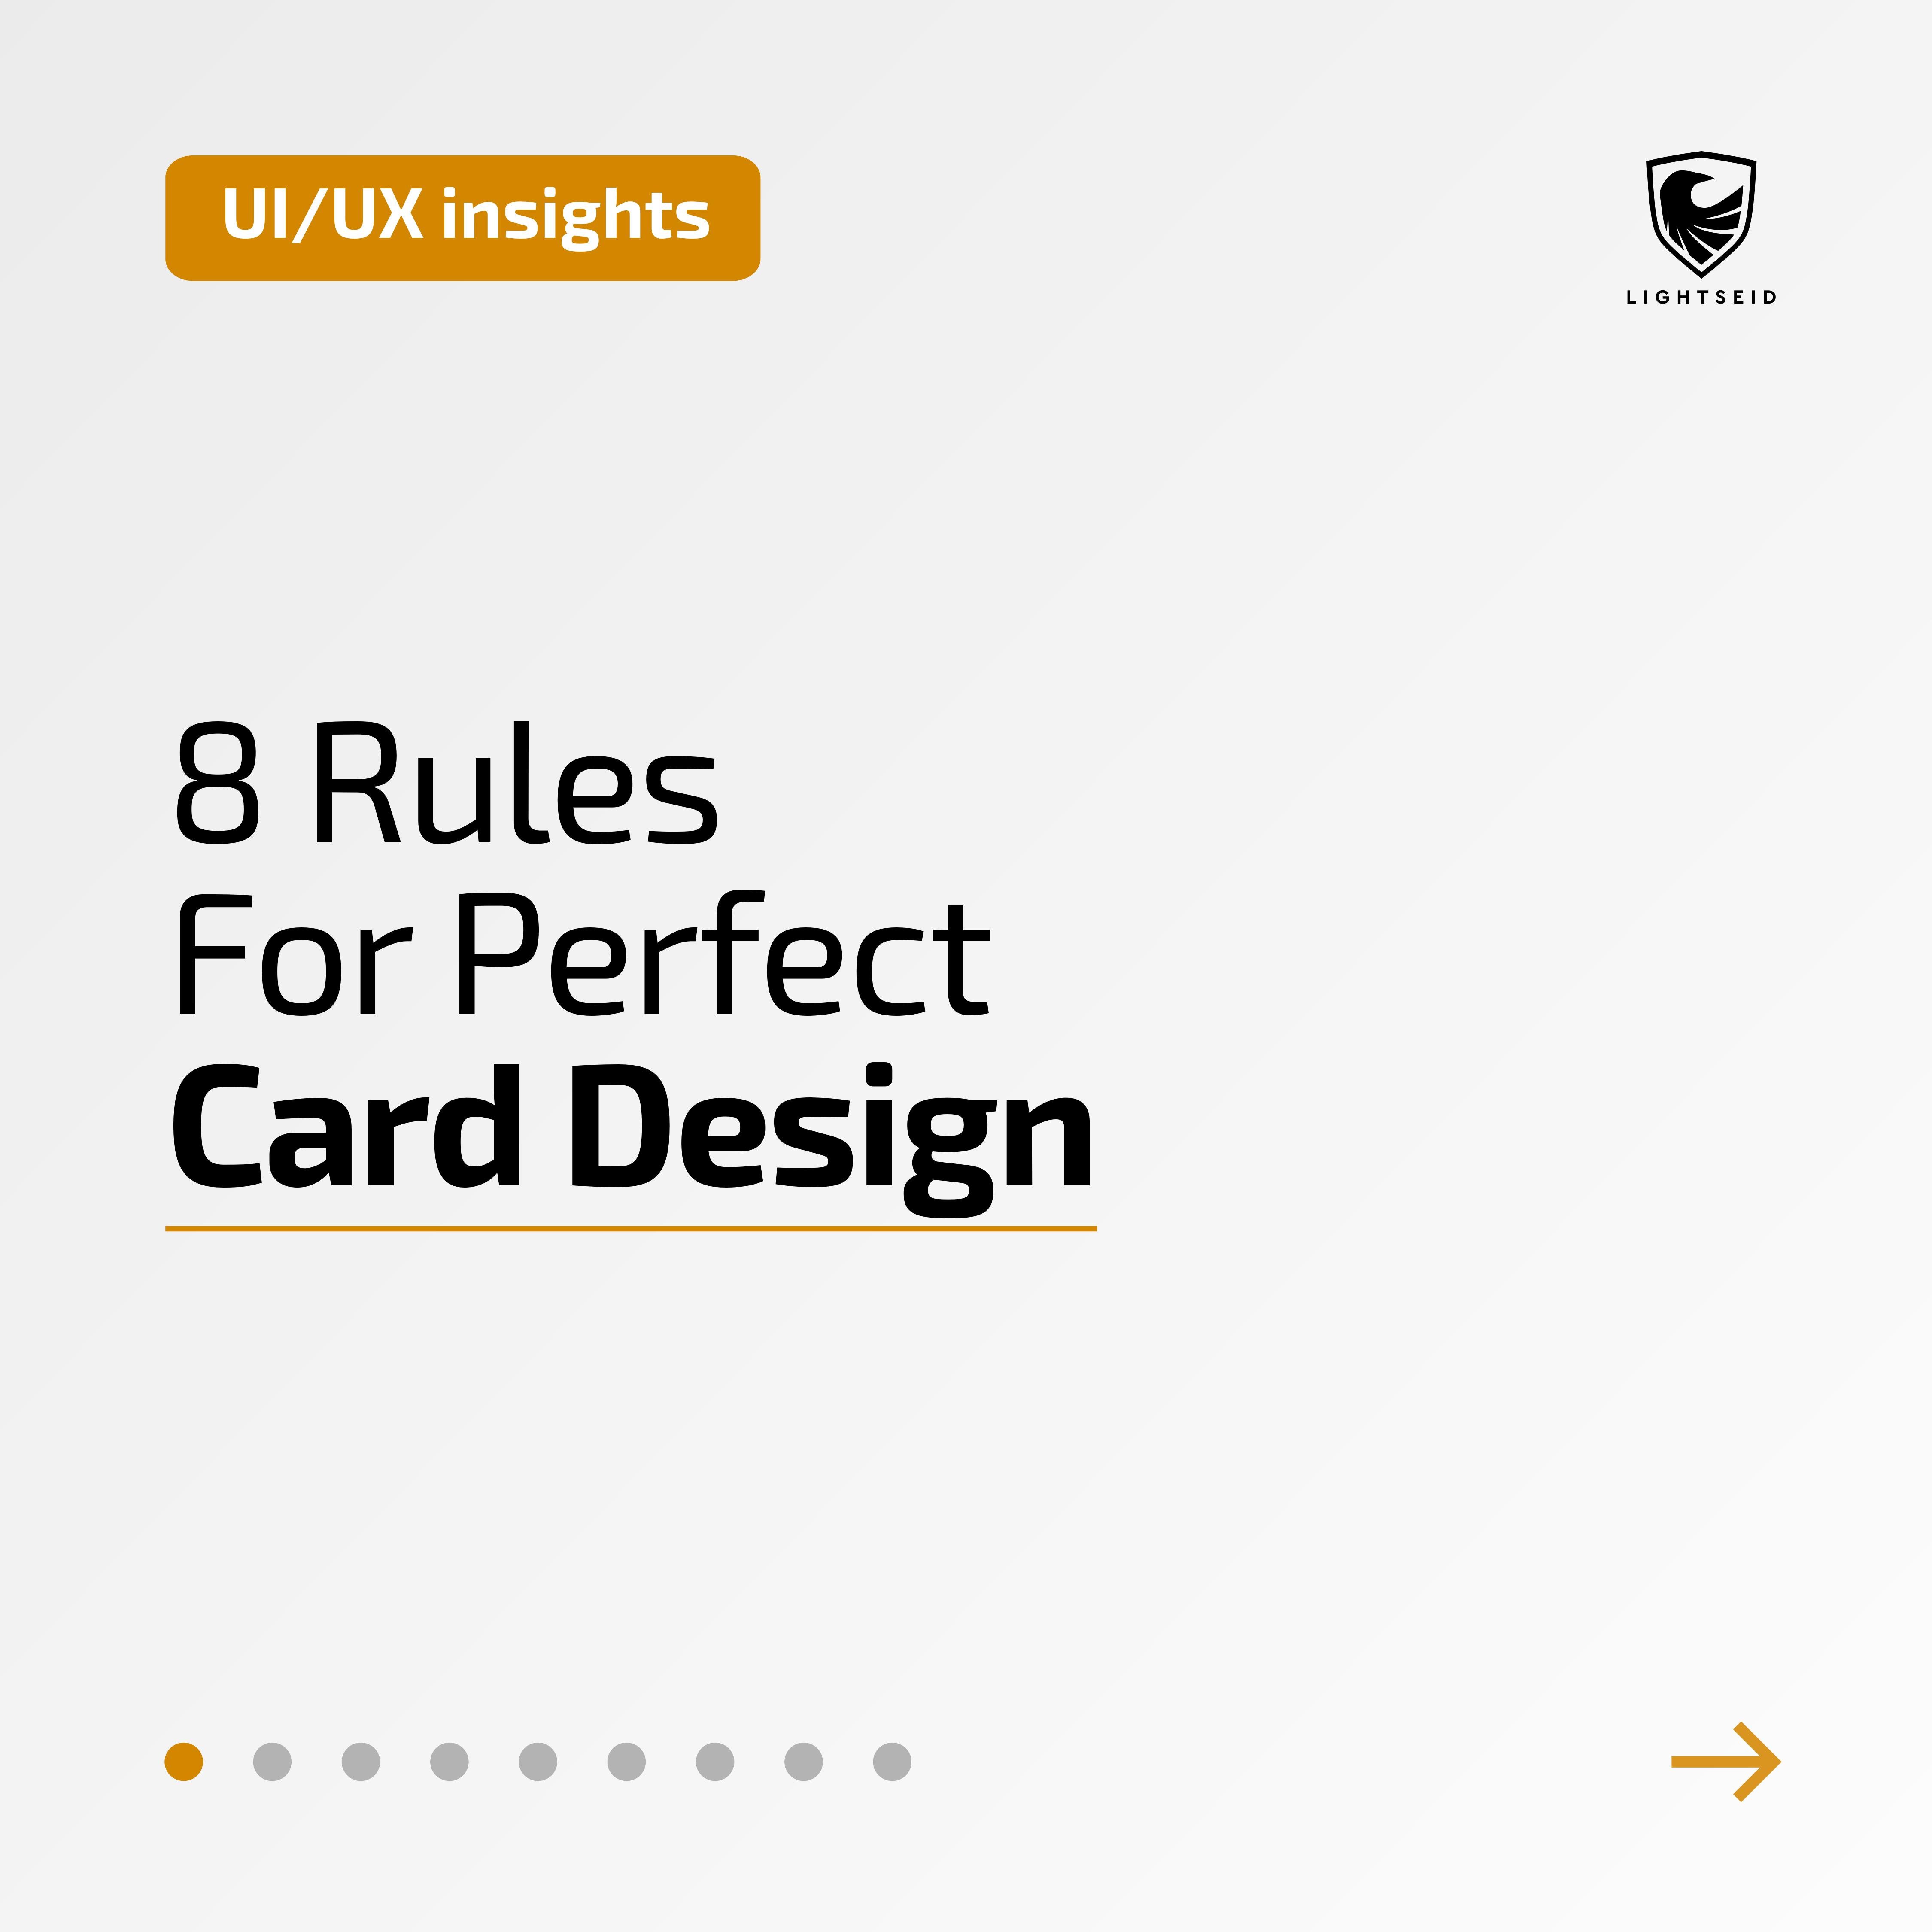 8 Rules For Perfect Card Design